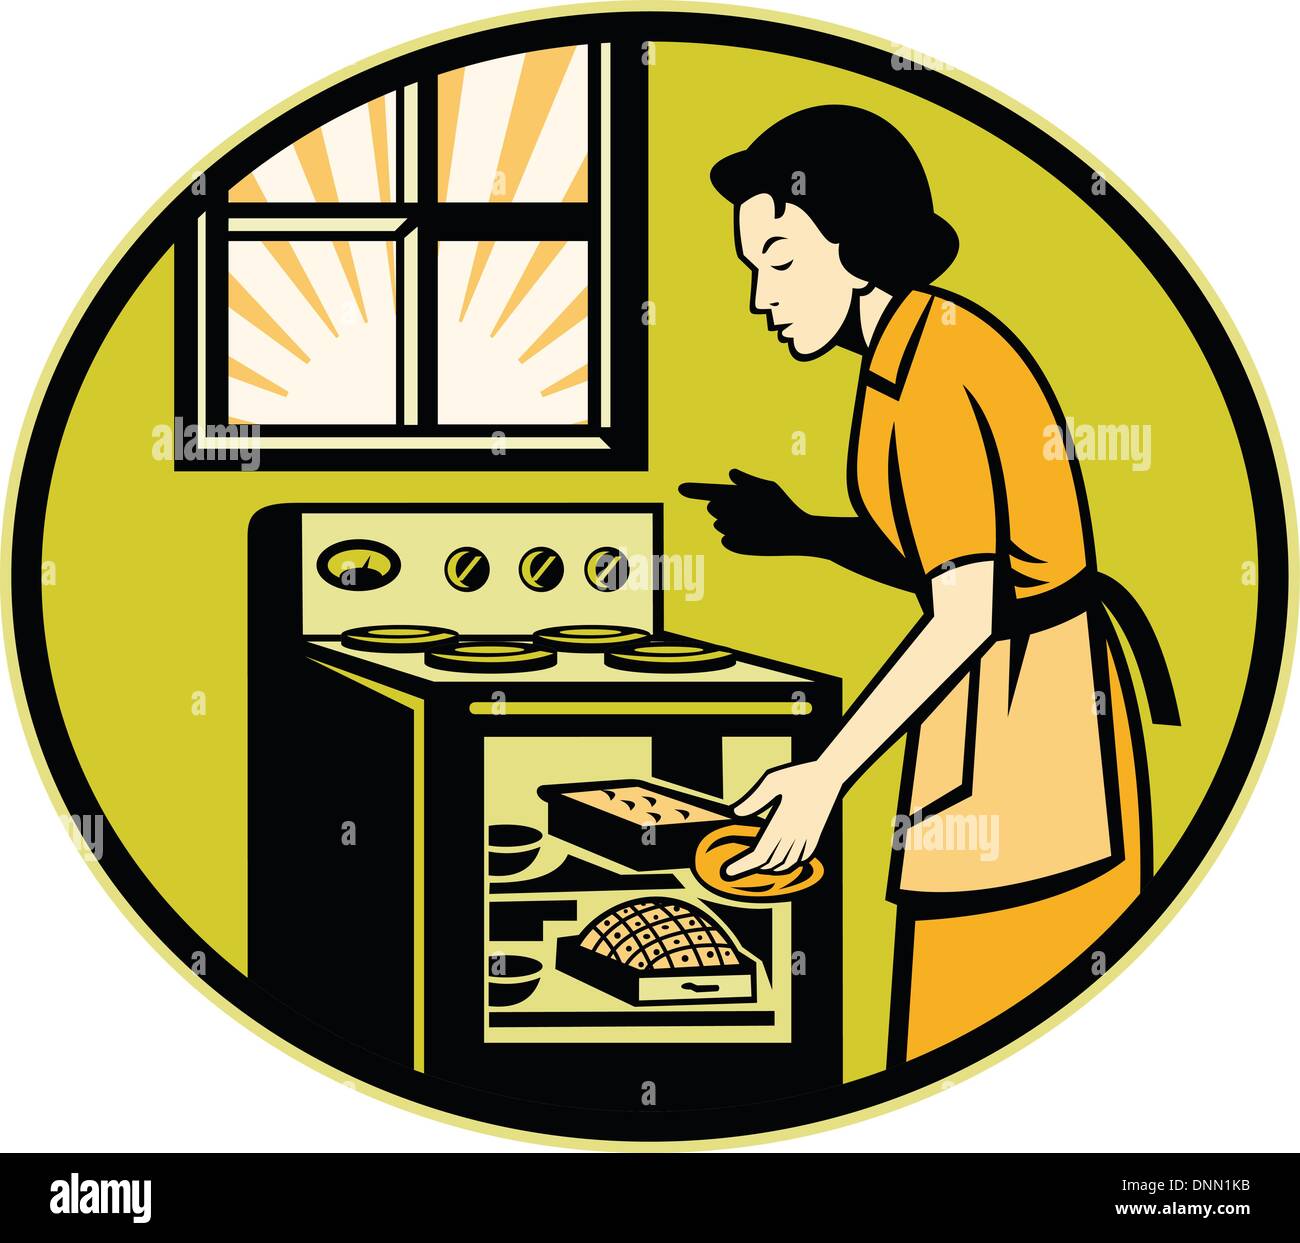 Illustration of a housewife woman baker wearing apron baking in stove oven with window done in retro style. Stock Vector